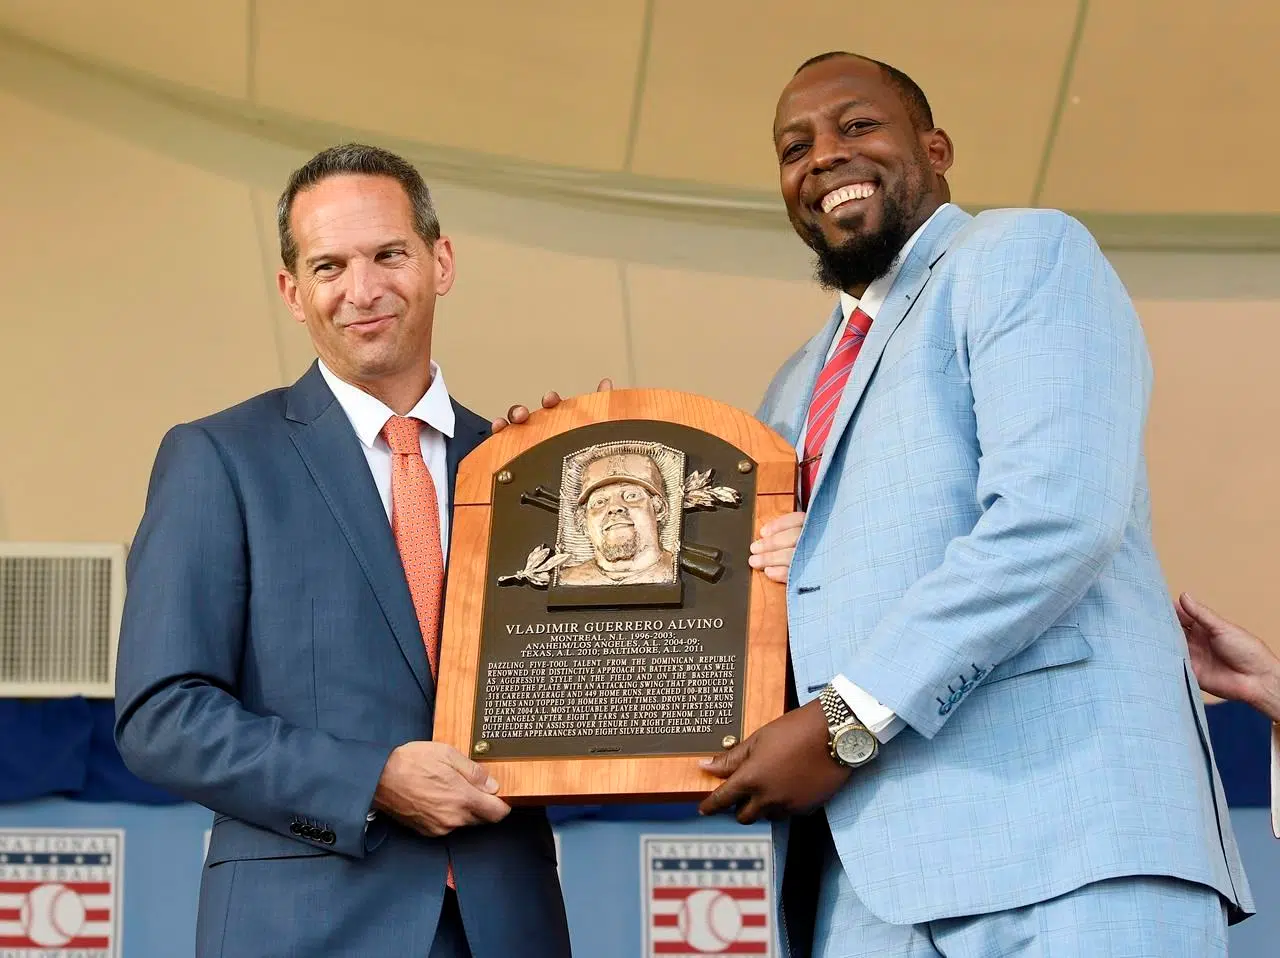 Vladimir Guerrero officially inducted into the Baseball Hall of Fame -  Montreal